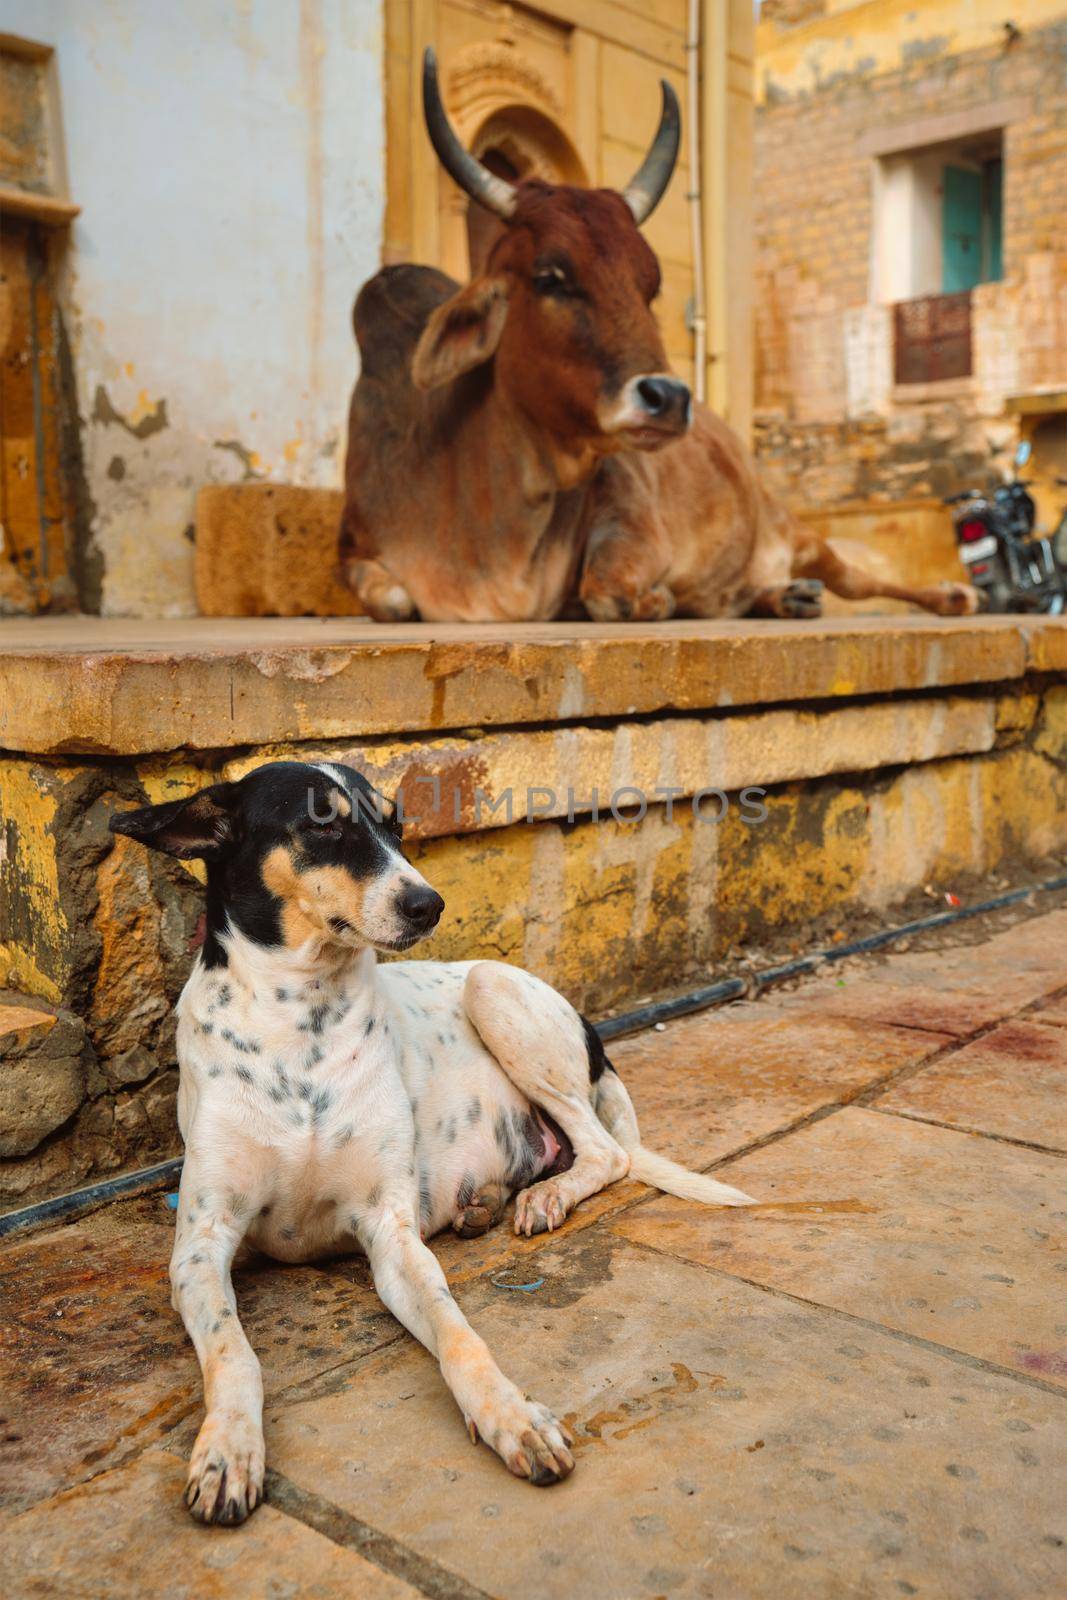 Indian cow and dog resting sleeping in the street. Cow is a sacred animal in India. Jaisalmer fort, Rajasthan, India